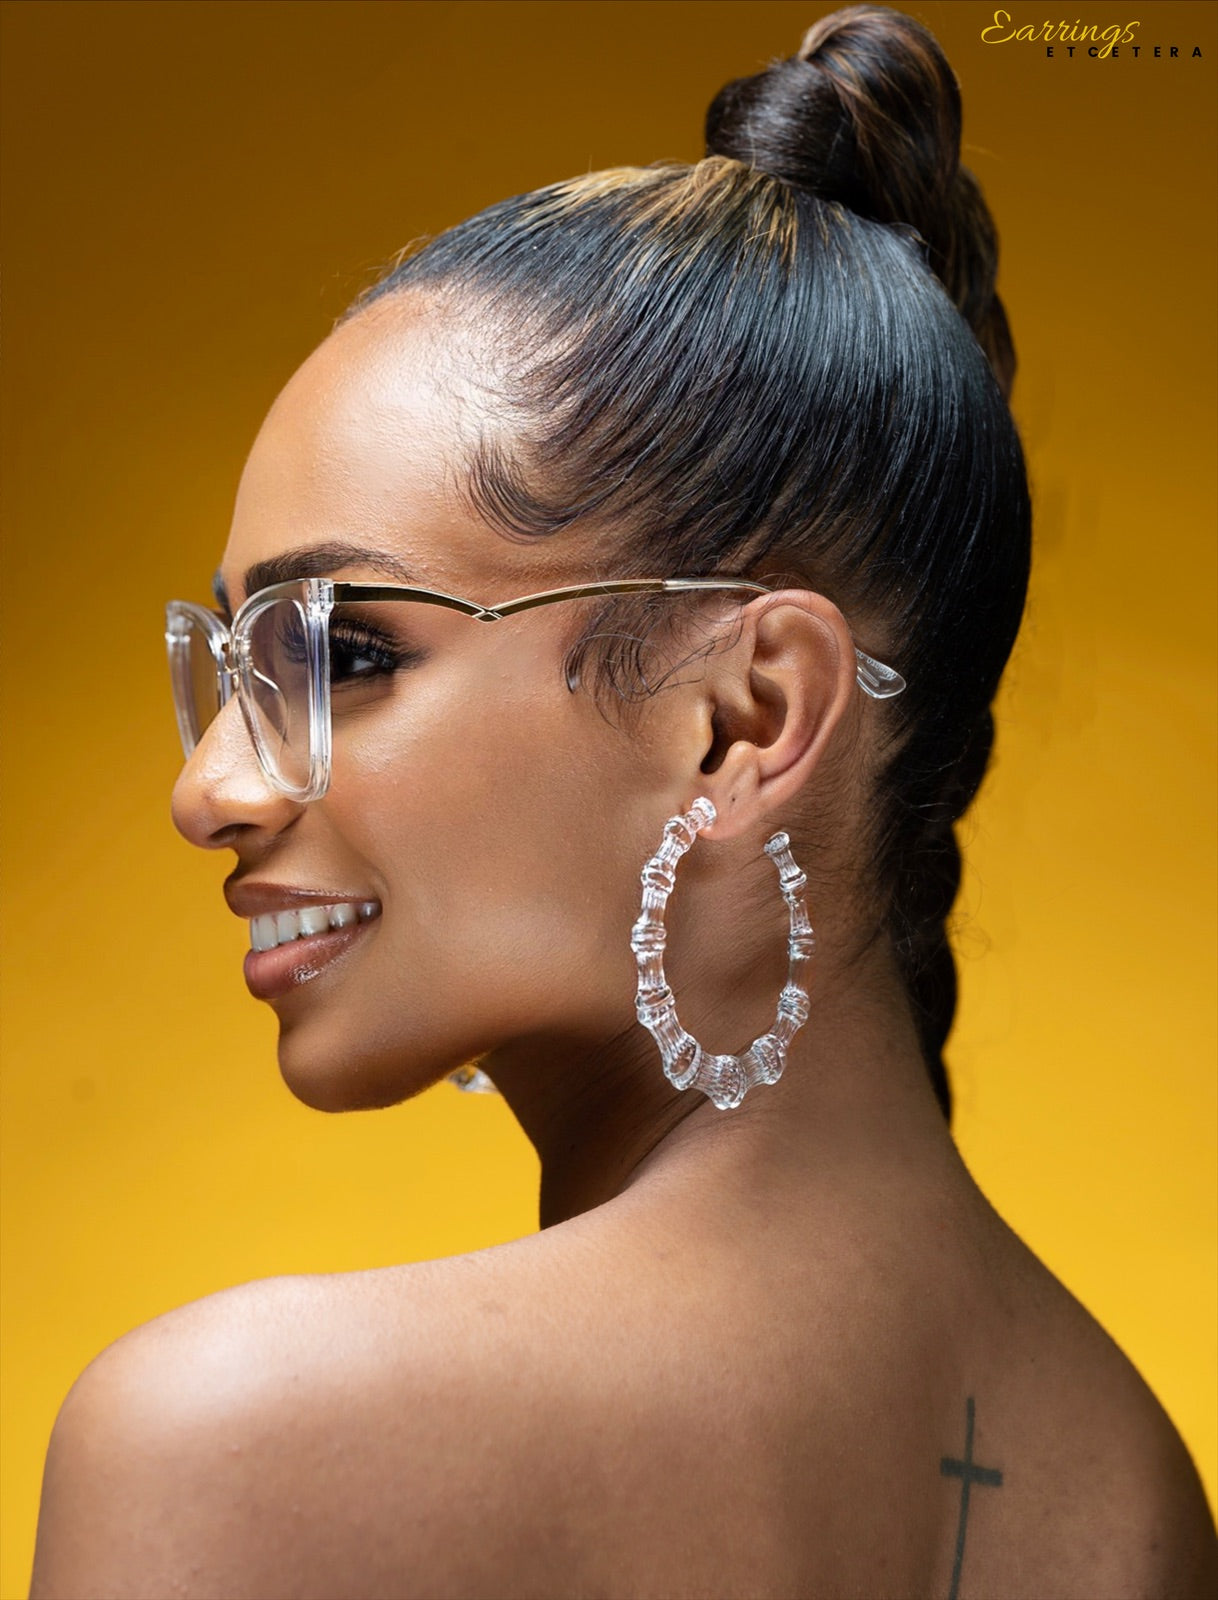 TRANSLUCENT BAMBOO HOOPS – Earrings Etcetera